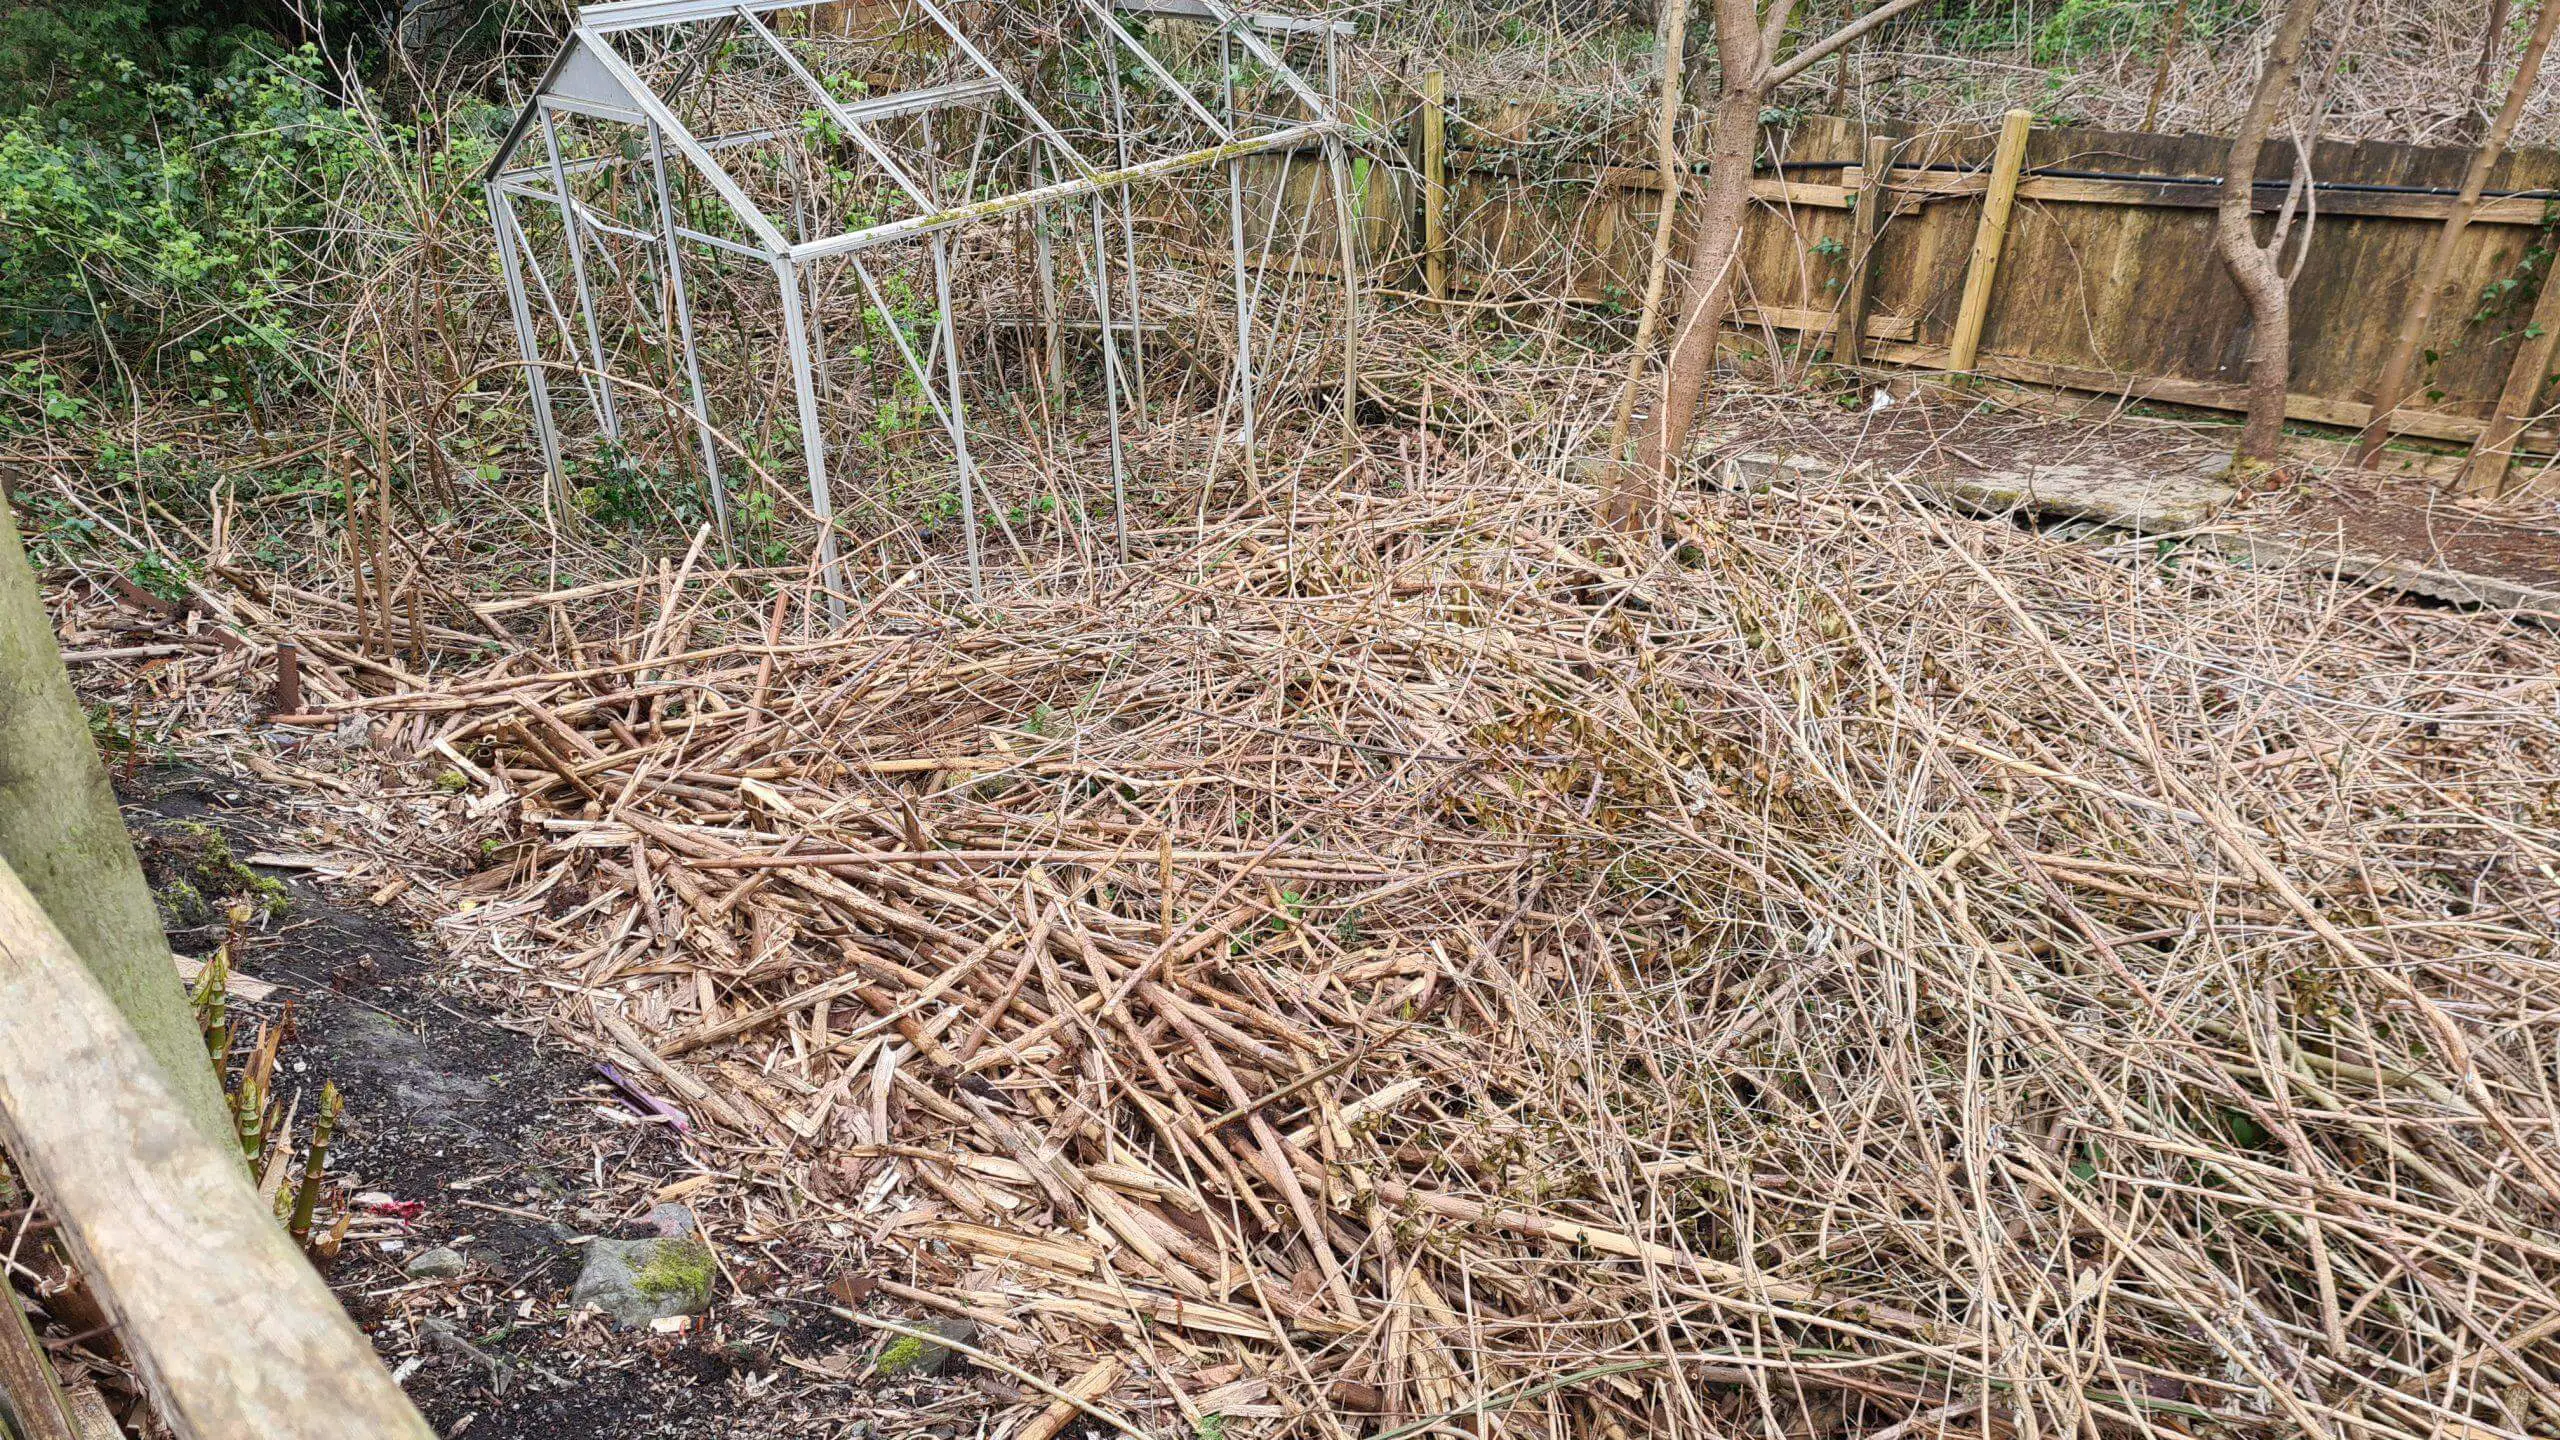 Area cleared of brown and brittle Japanese knotweed stems